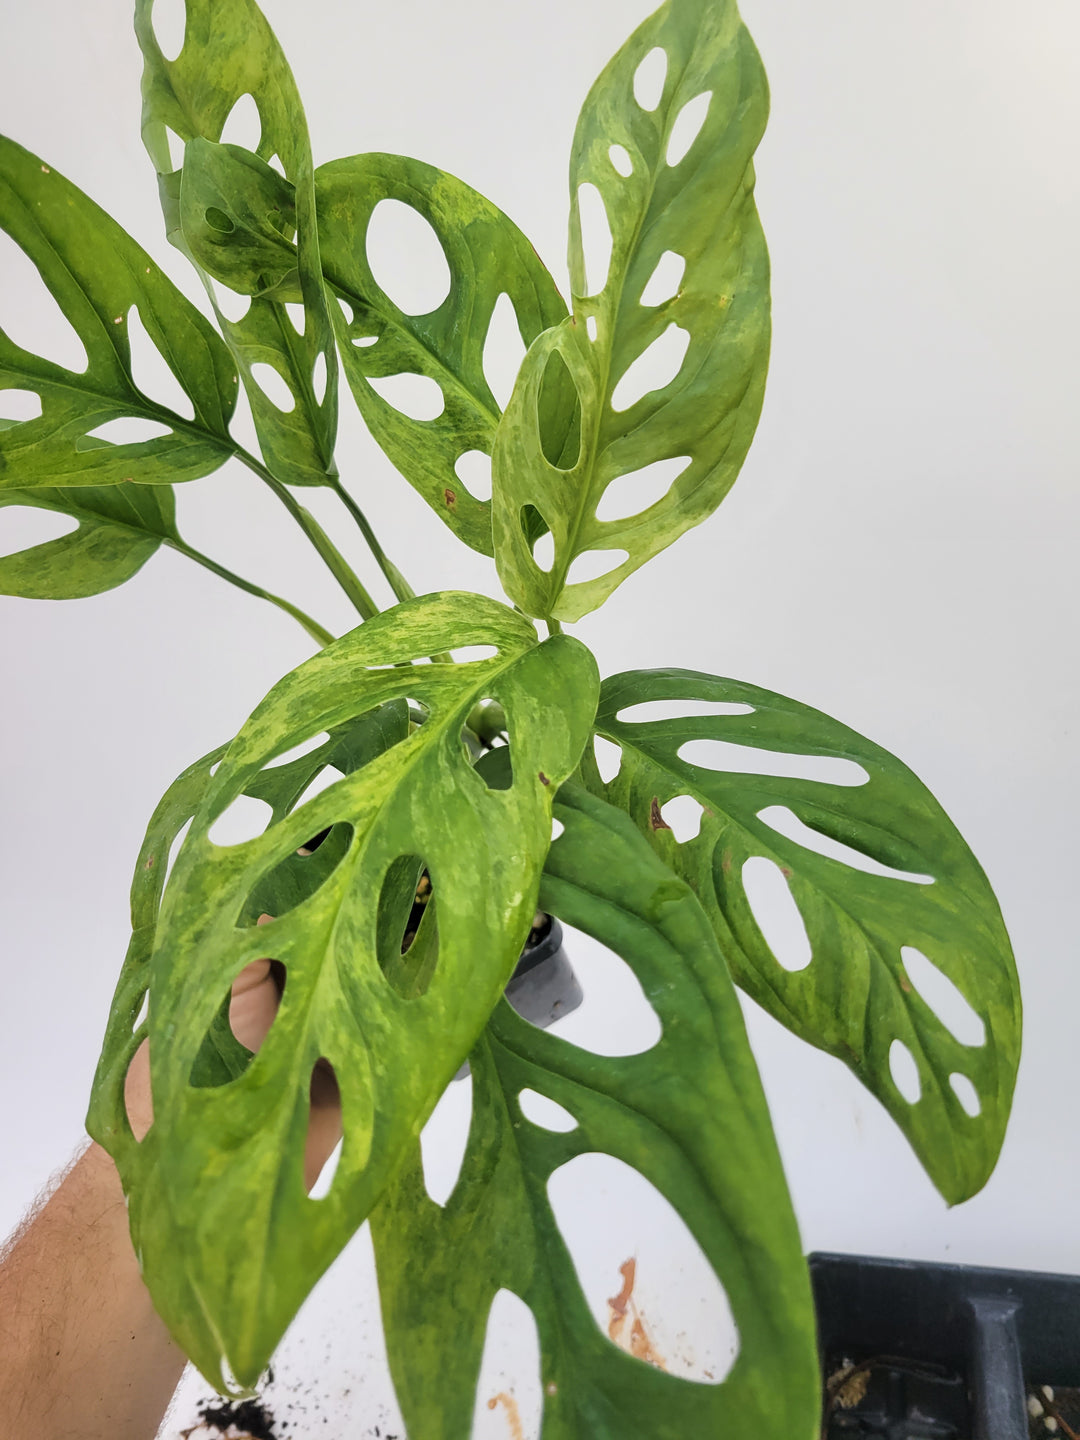 Variegated Monatera Adansonii Mint very Large! variegated swiss cheese plant, easy tropical plant US seller, #F8 - Nice Plants Good Pots